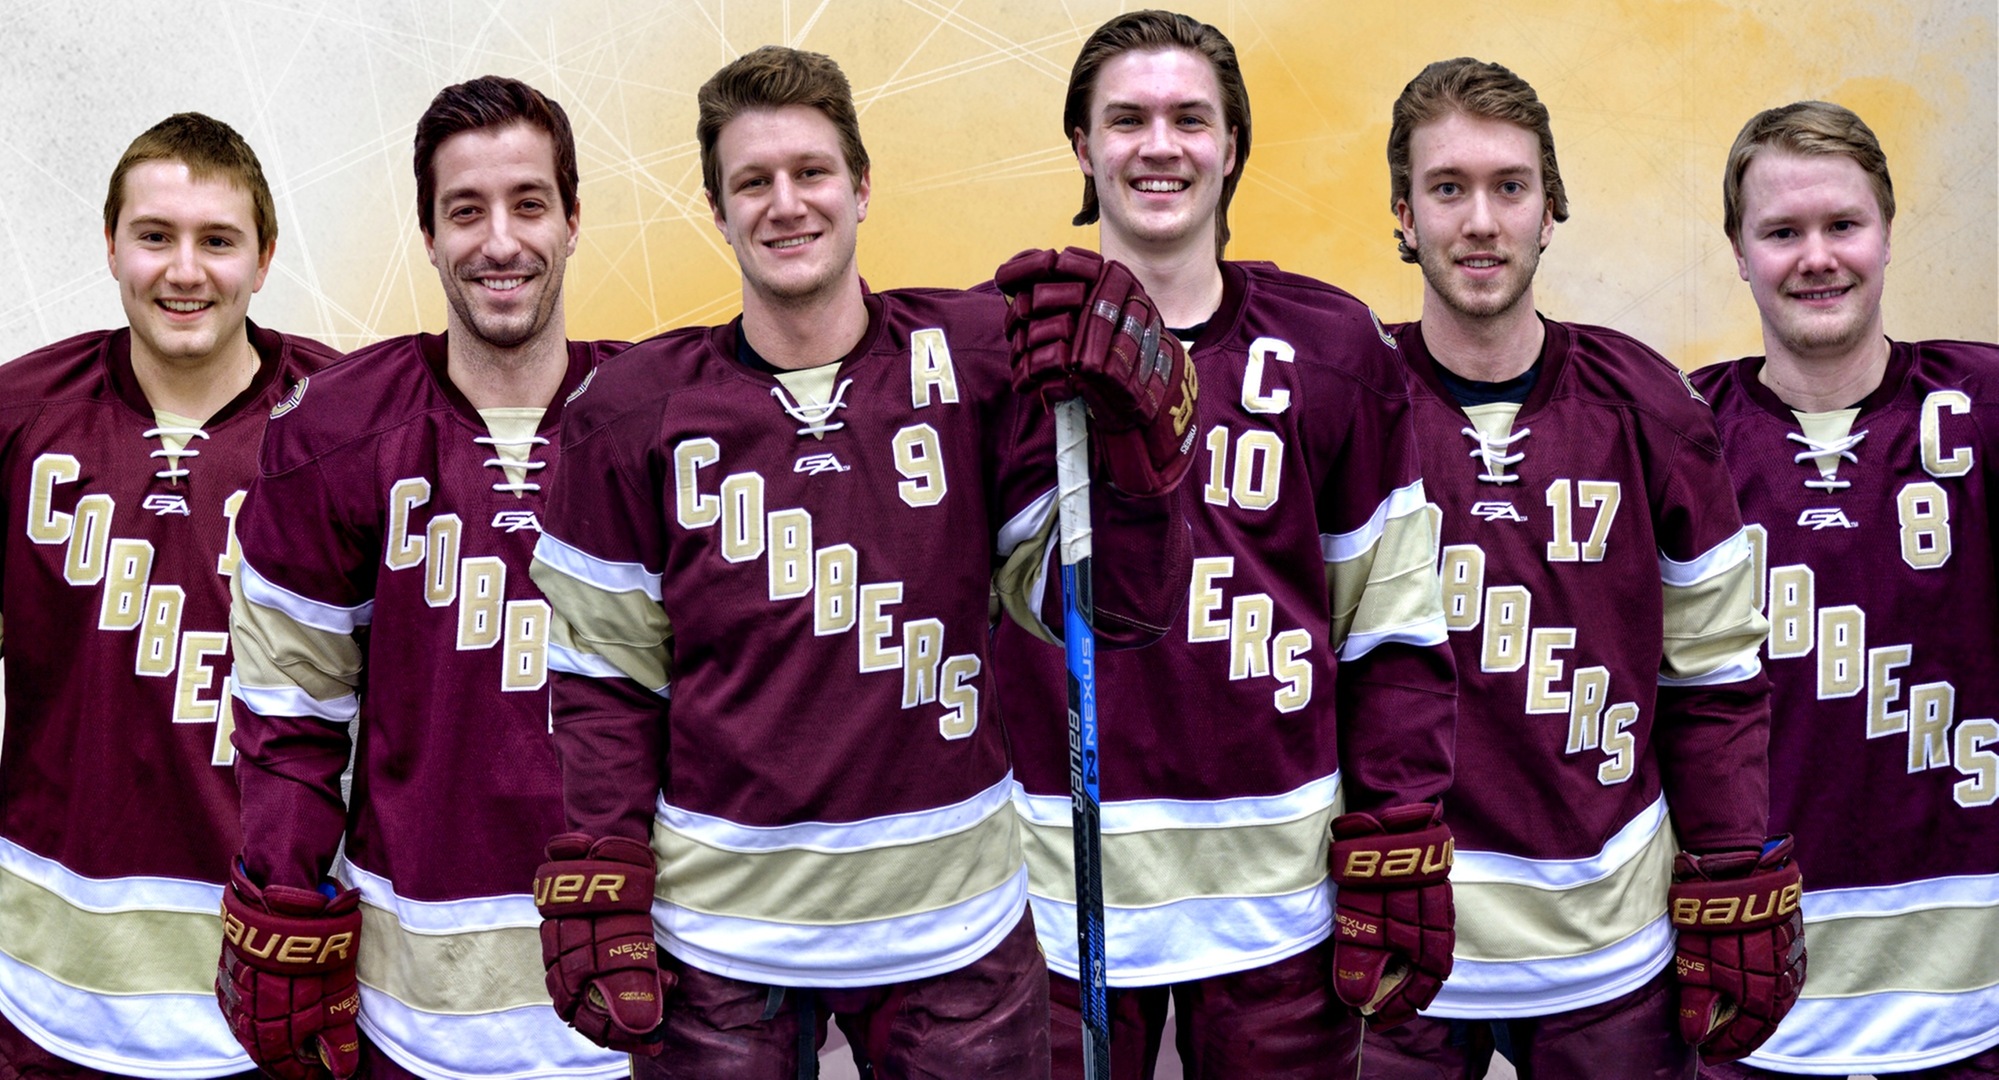 The Cobber seniors helped Concordia beat Augsburg in the regular season finale and earn their fourth straight trip to the postseason.